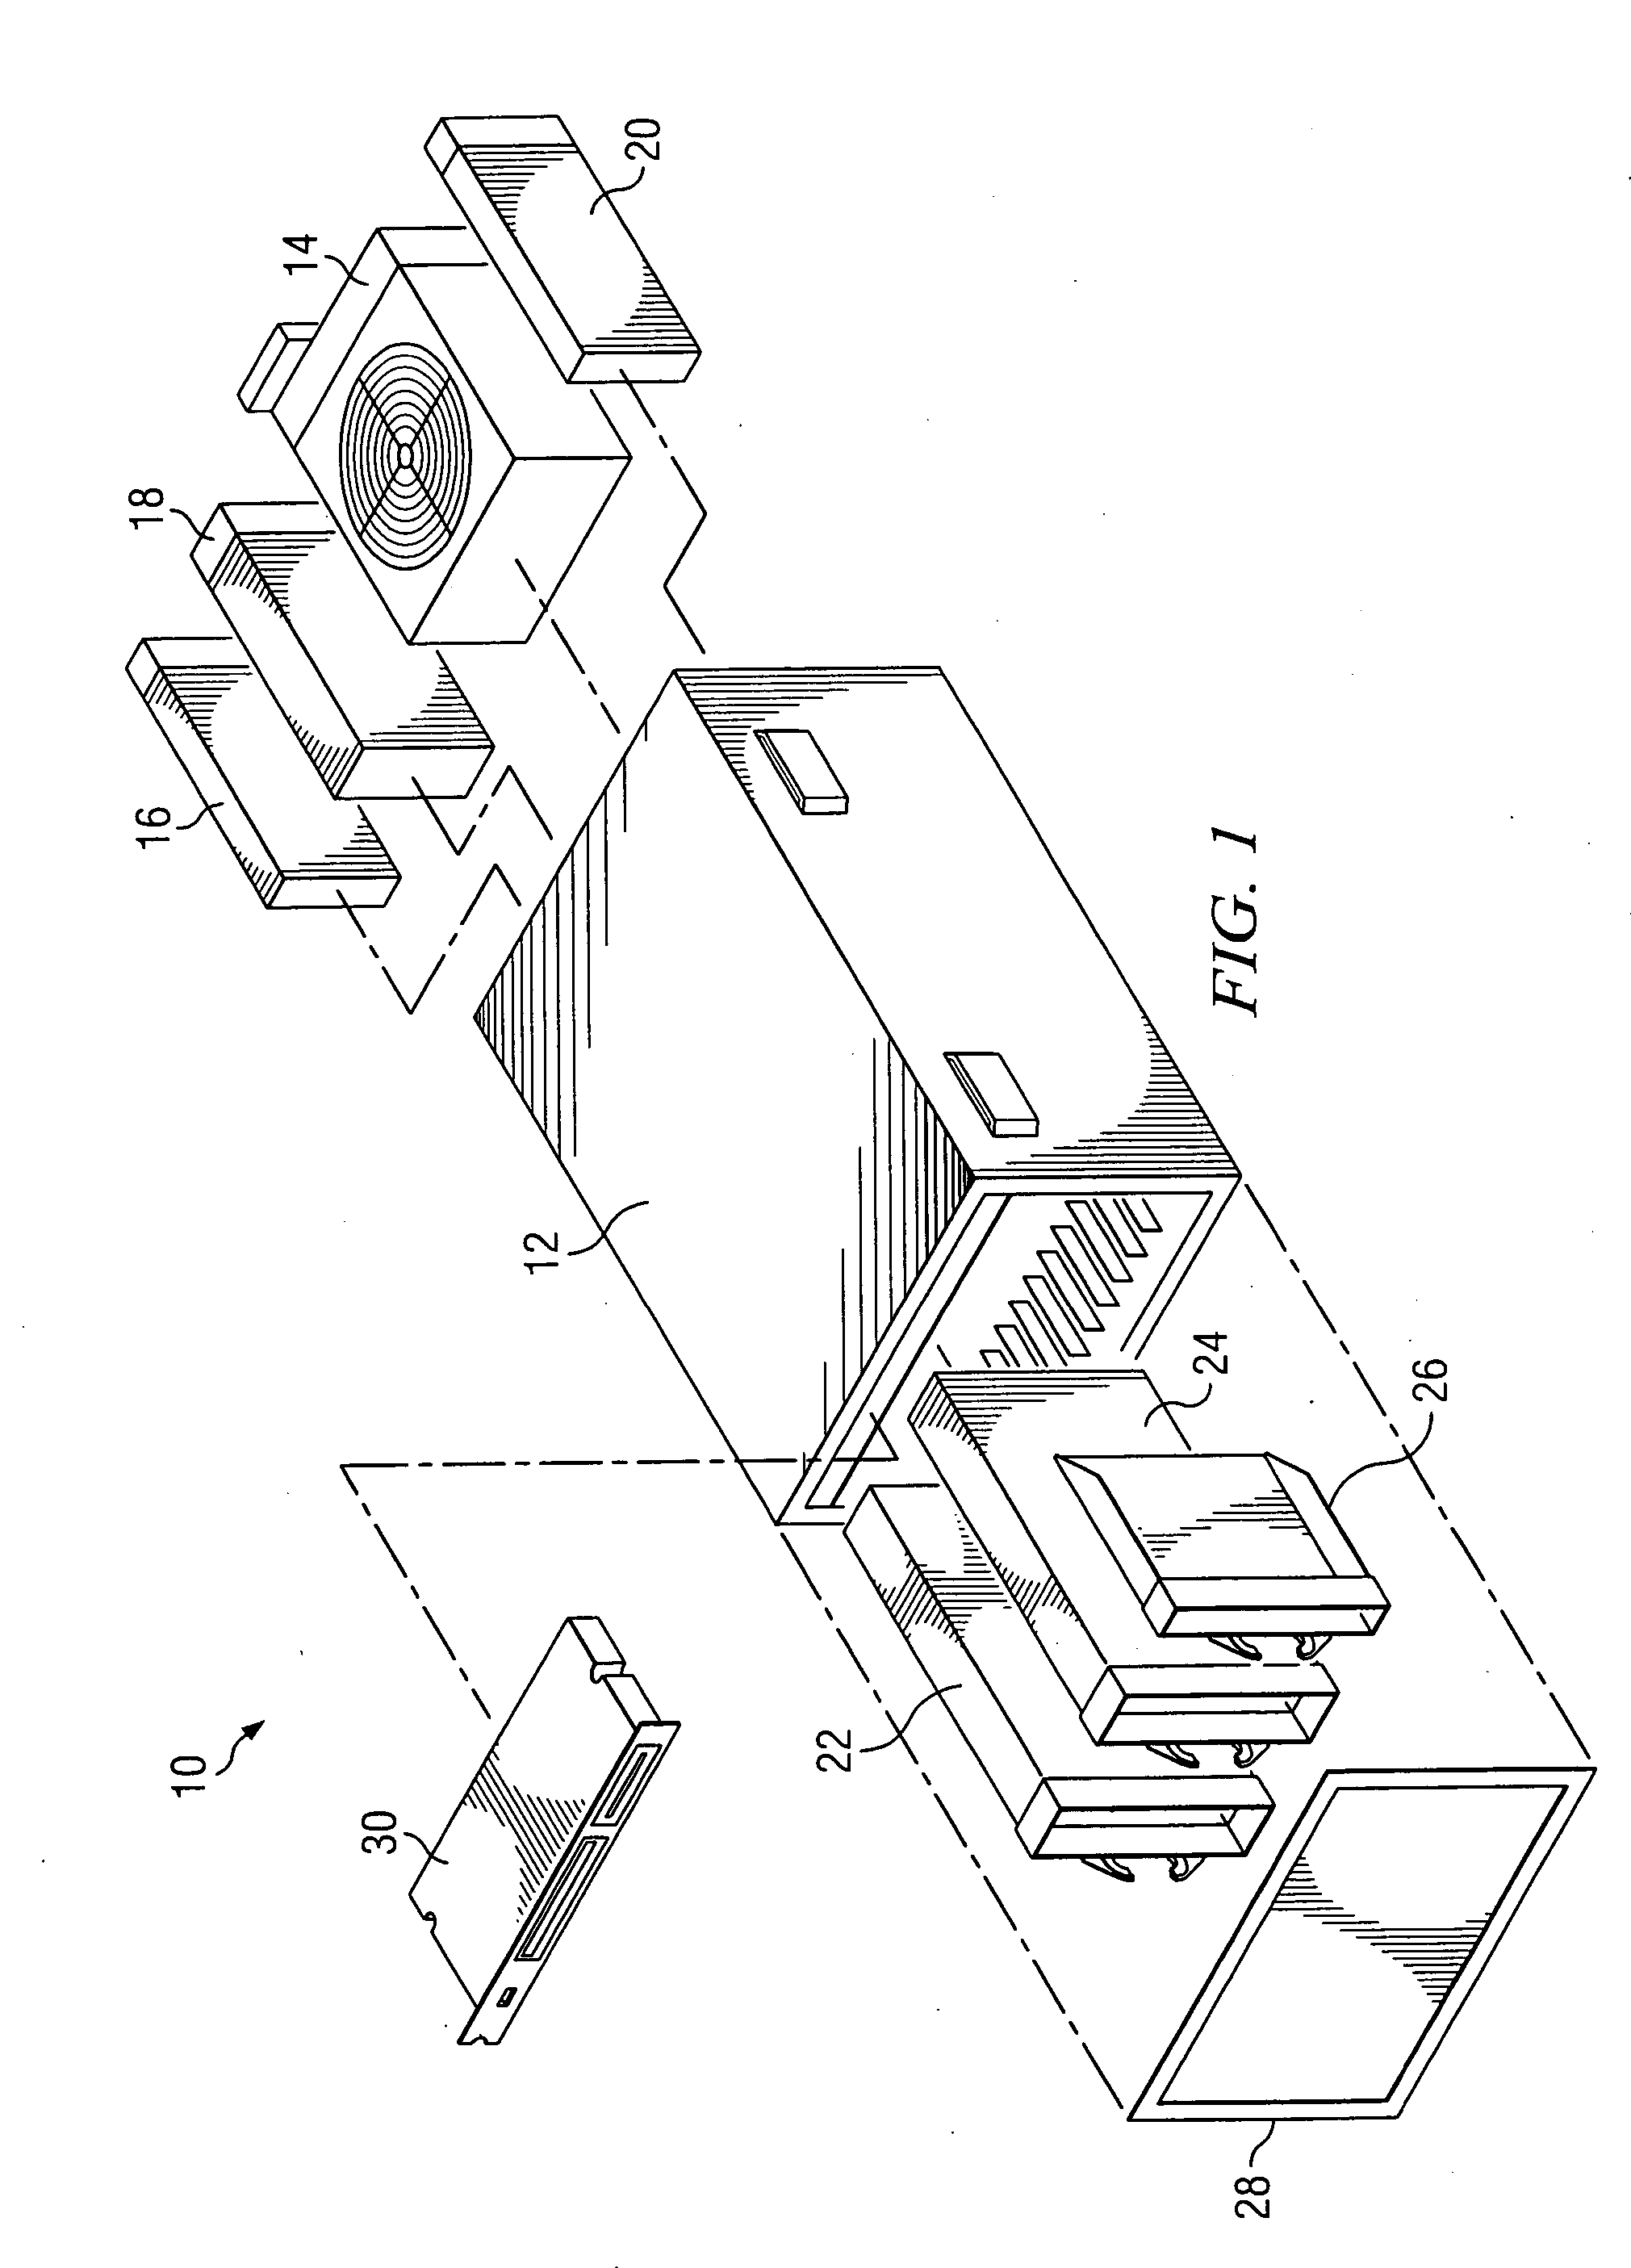 Damping rotational vibration in a multi-drive tray